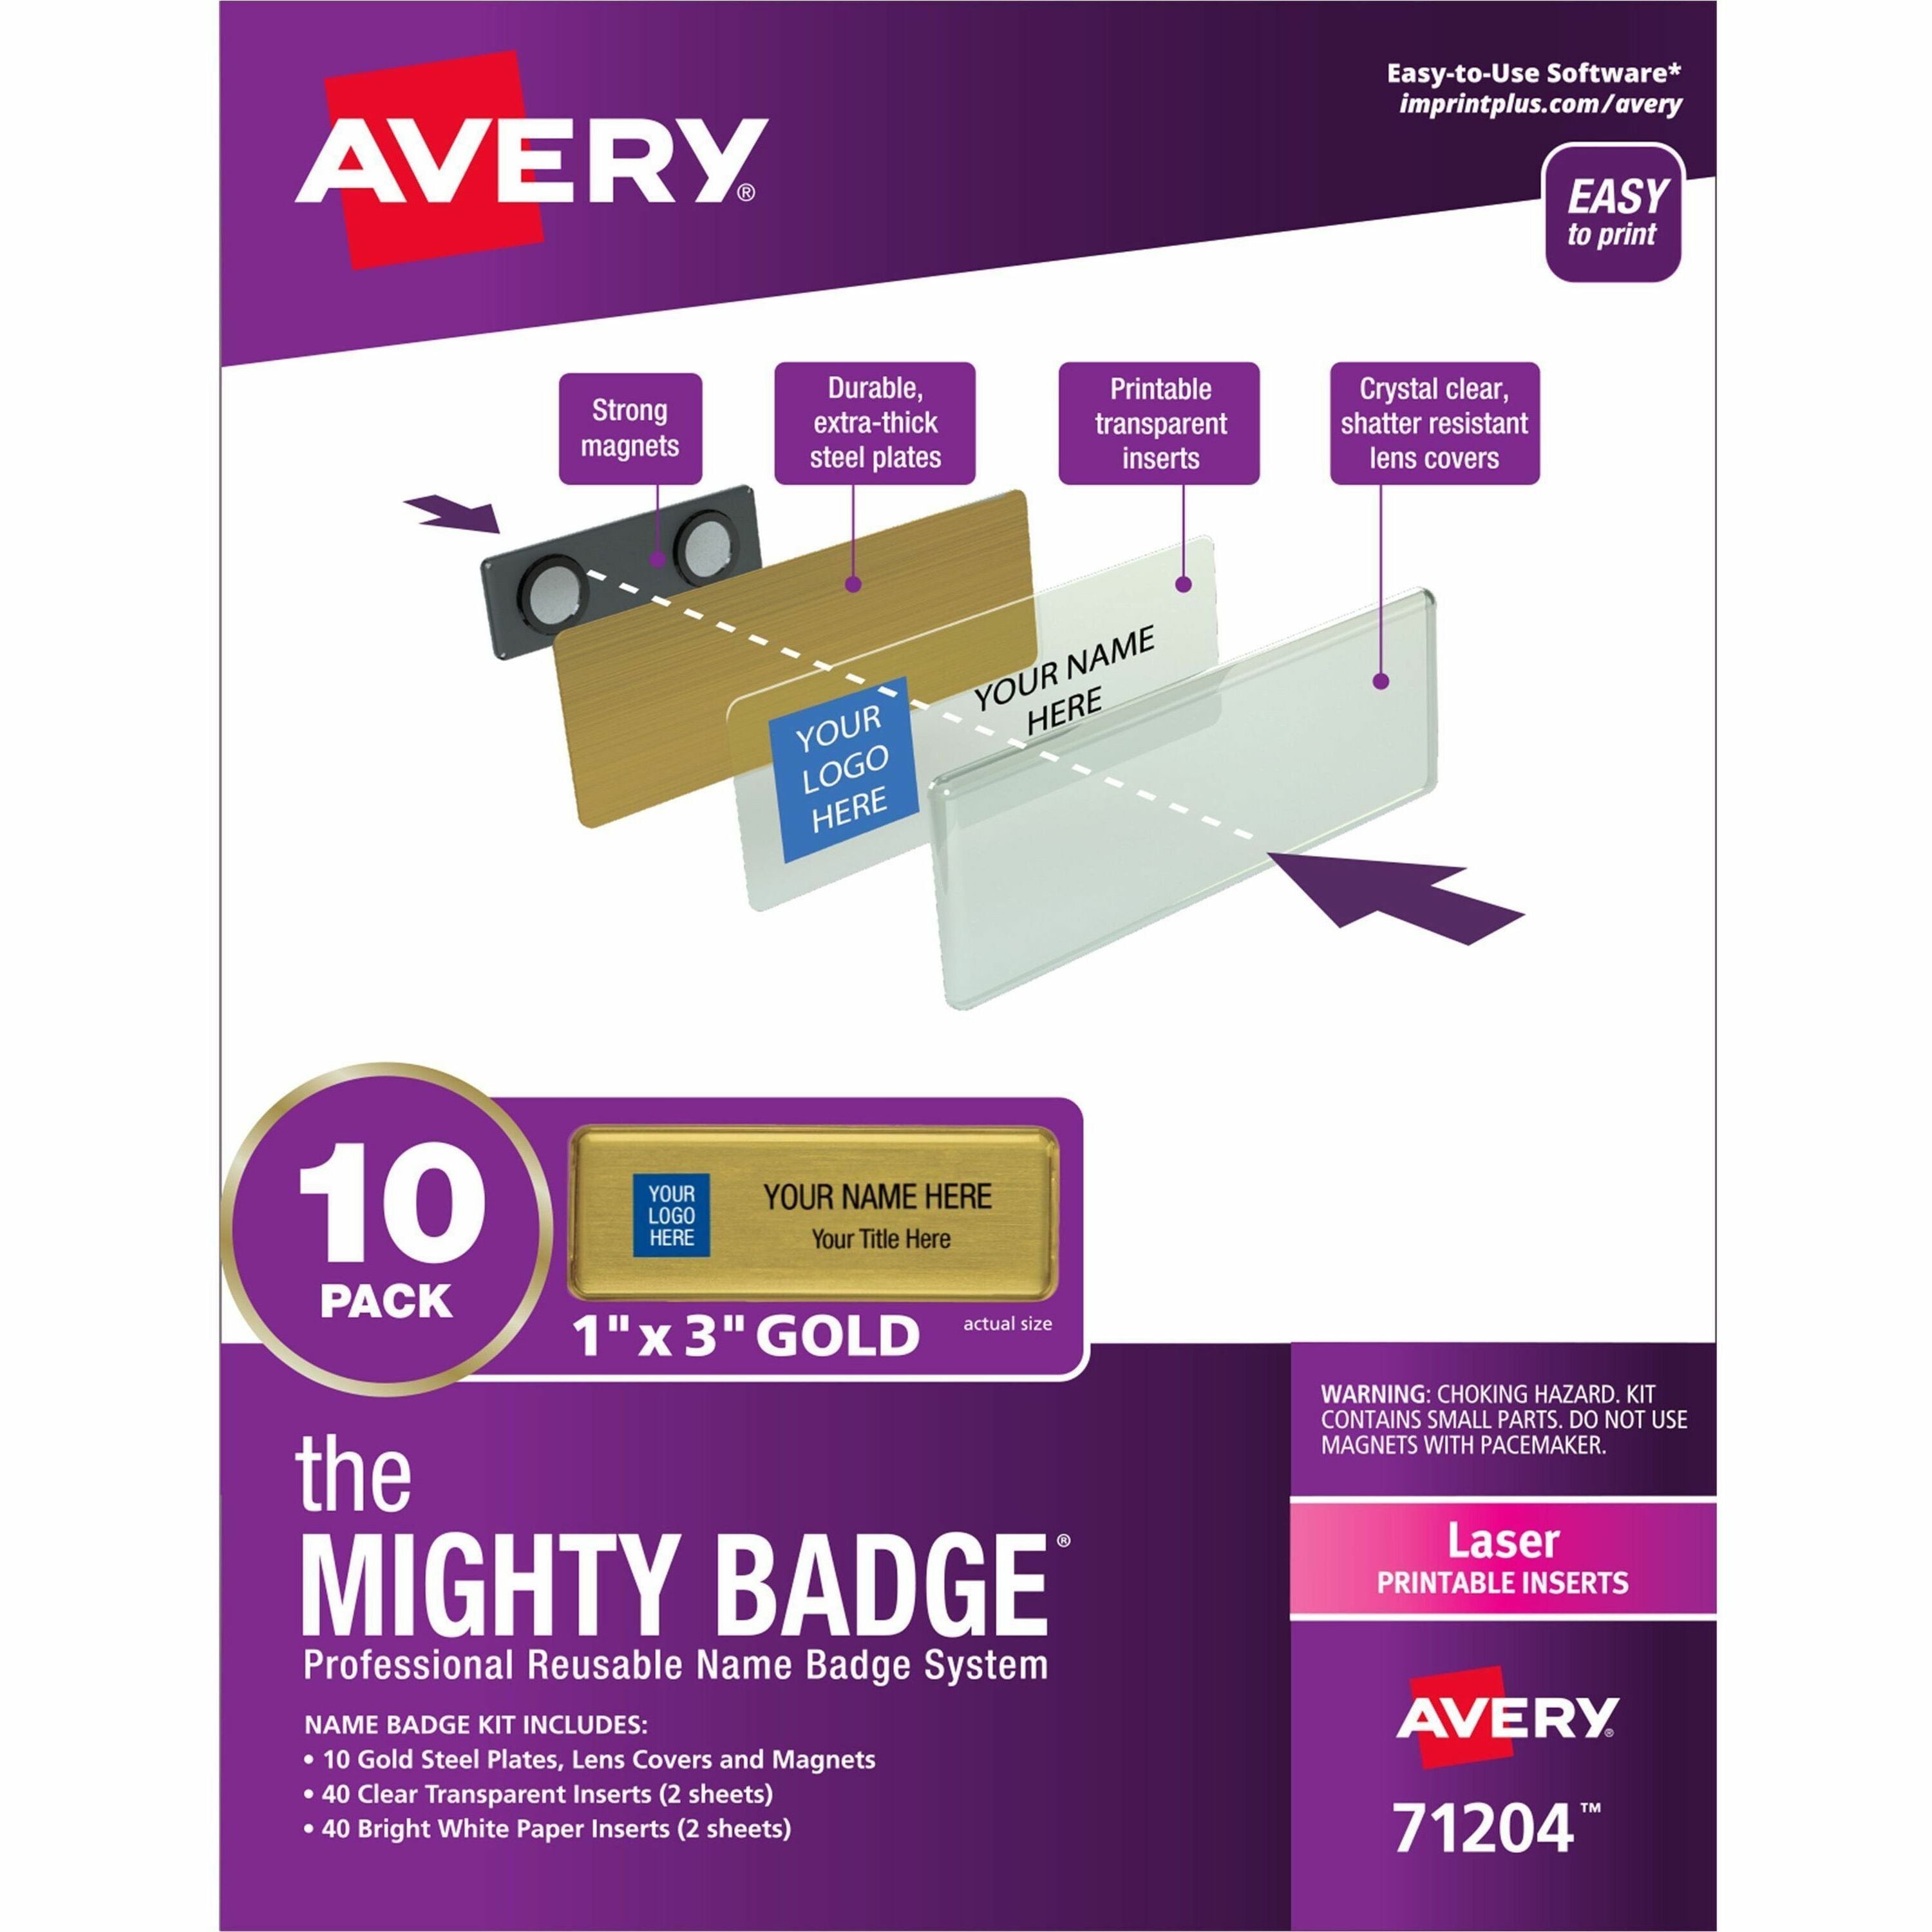 the-mighty-badge-mighty-badge-professional-reusable-name-badge-system-gold_ave71204 - 1